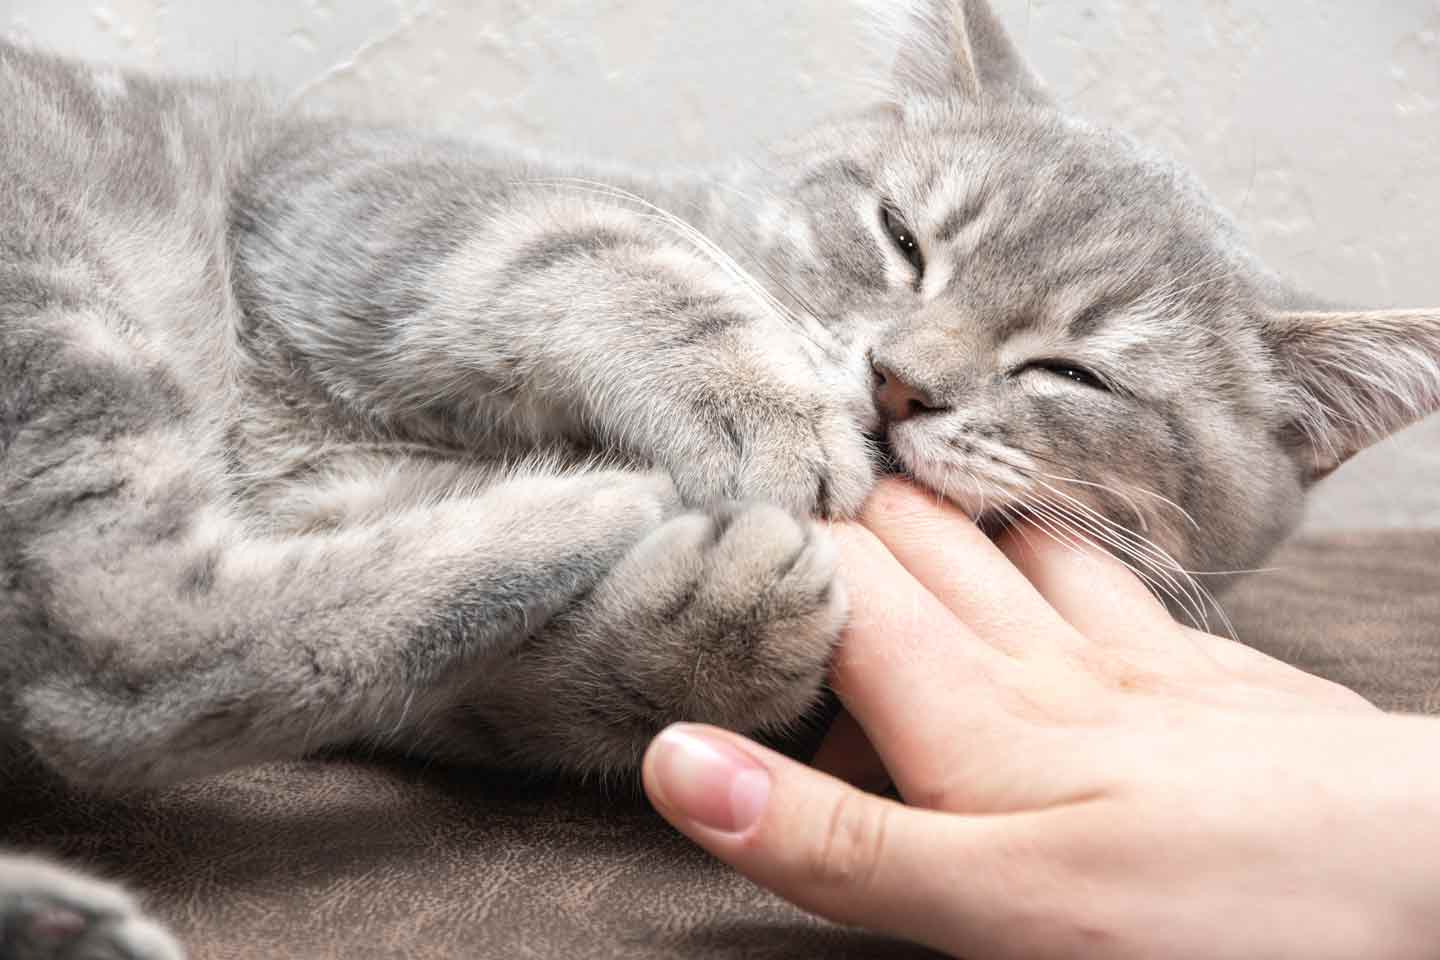 Photo of a kitten playfully biting a person's hand